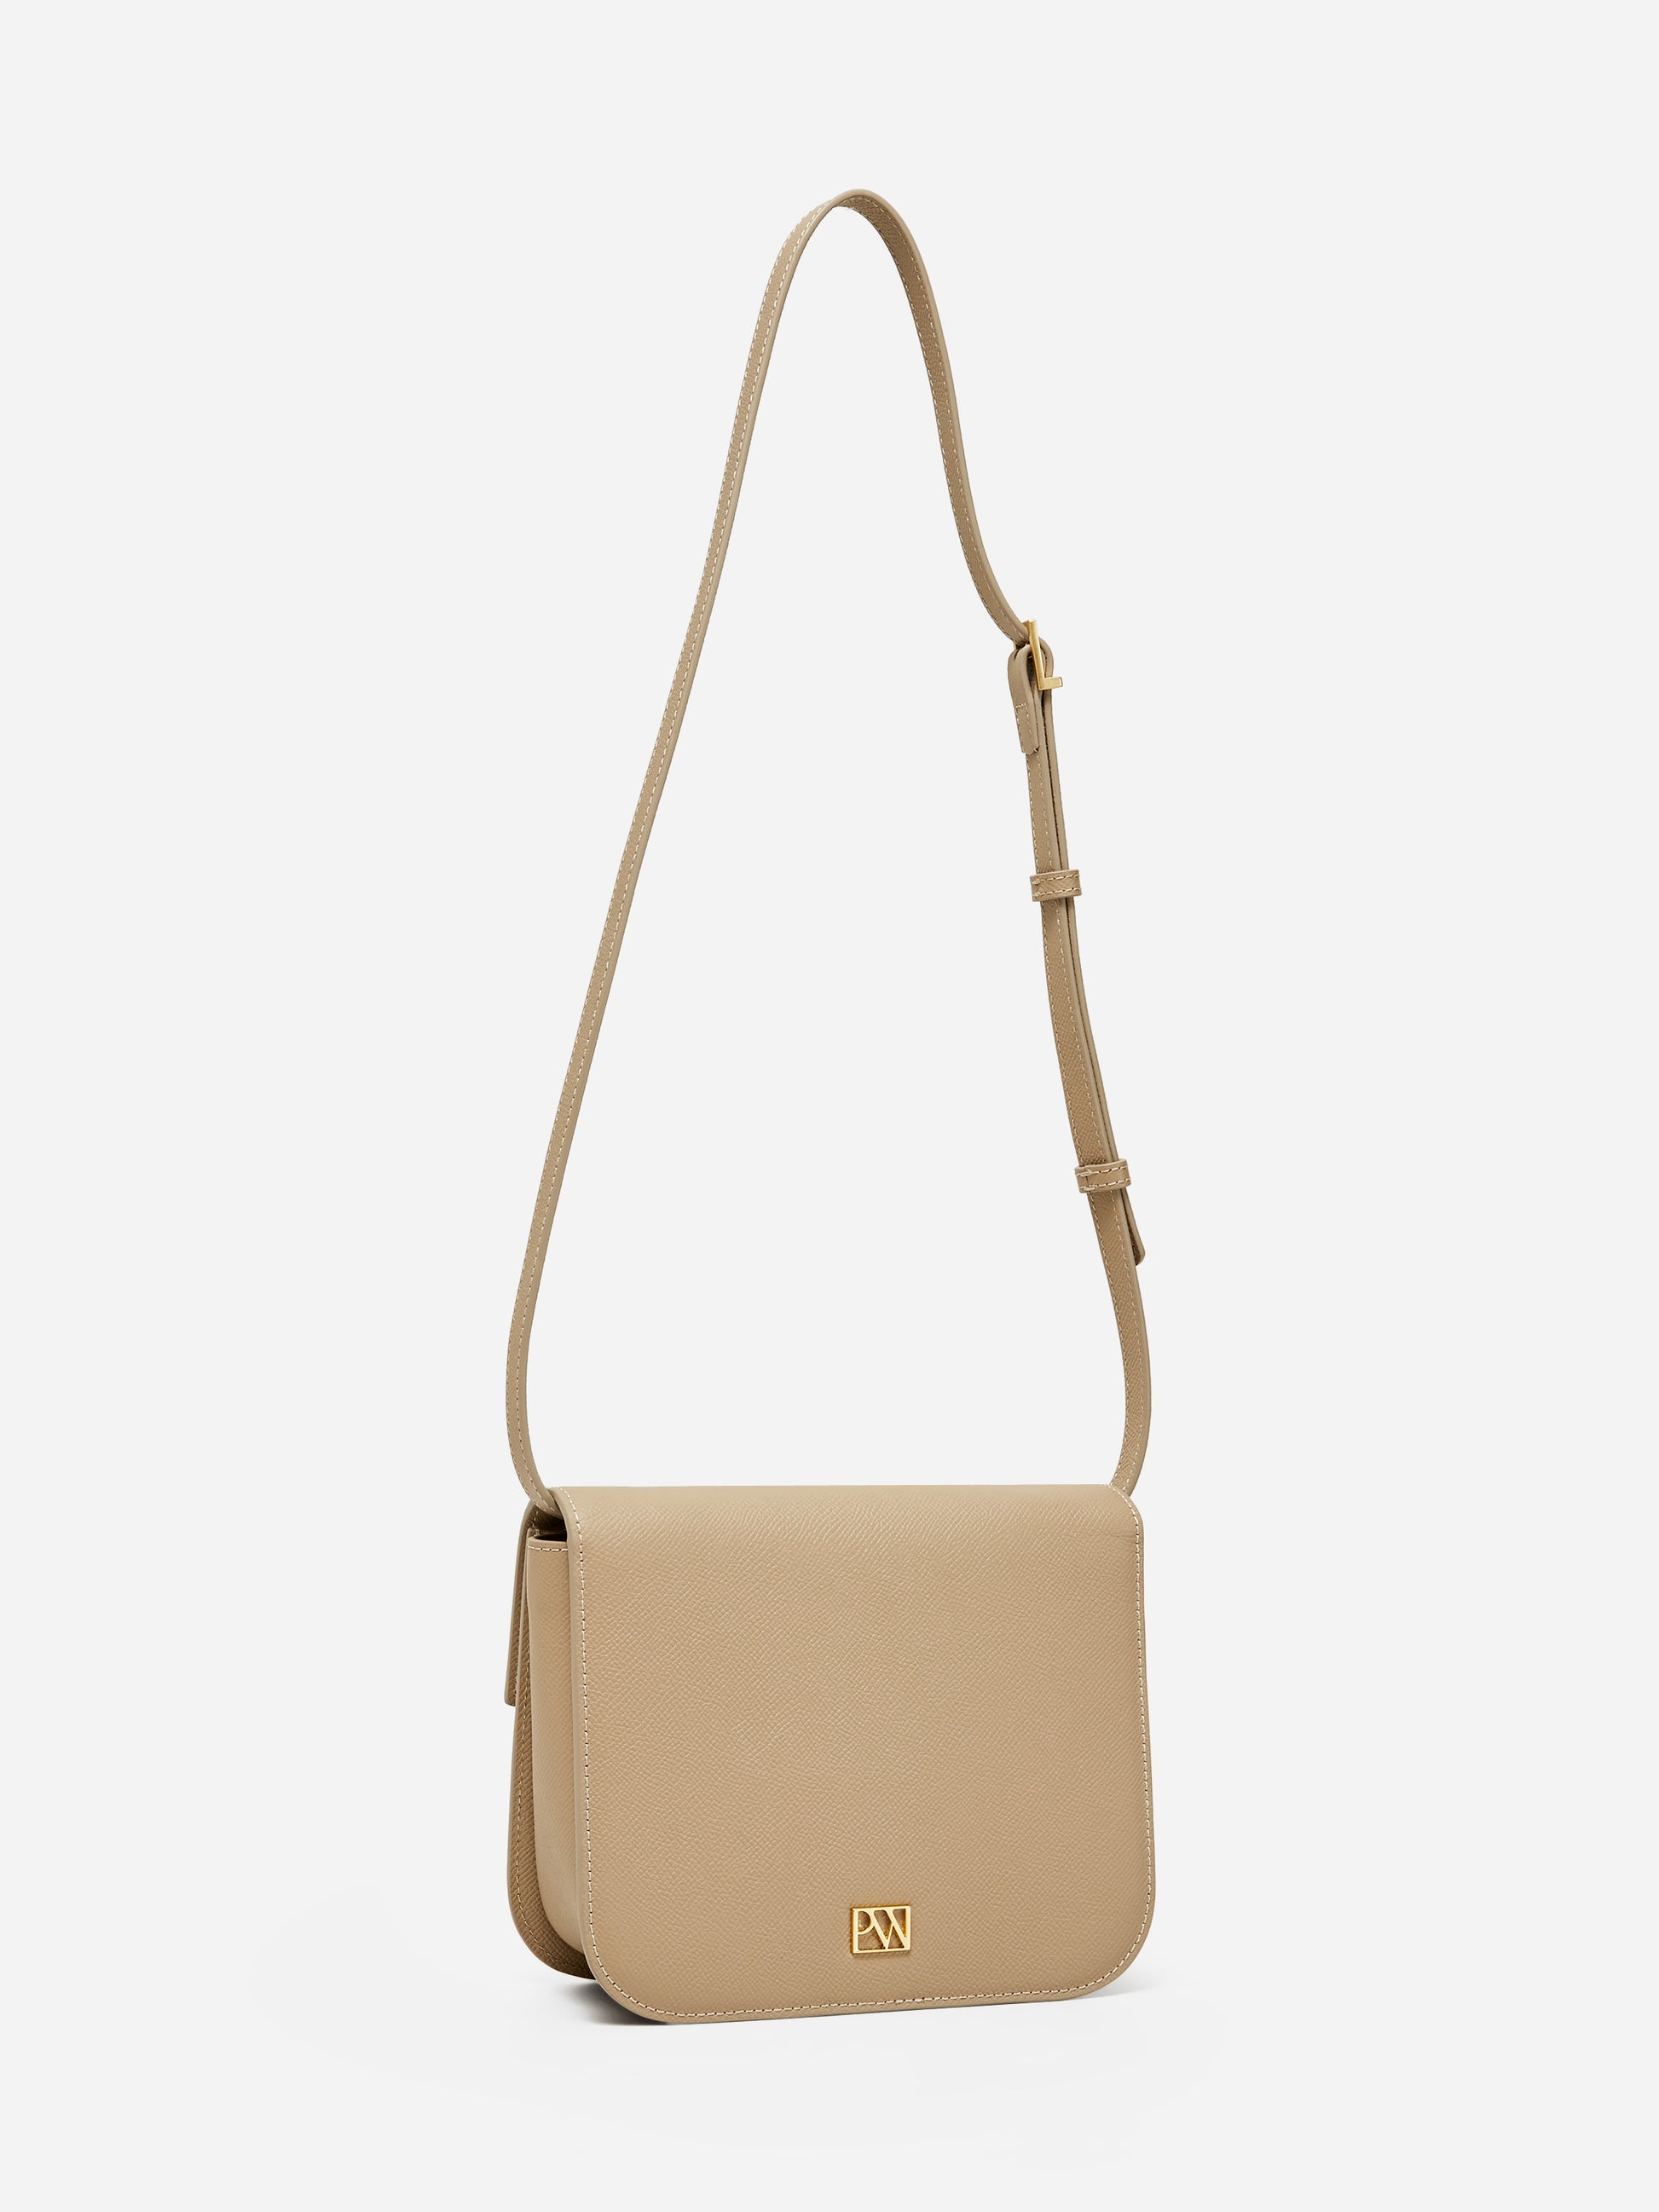 Taupe Front Flap Top Handle Crossbody Bag - CHARLES & KEITH US